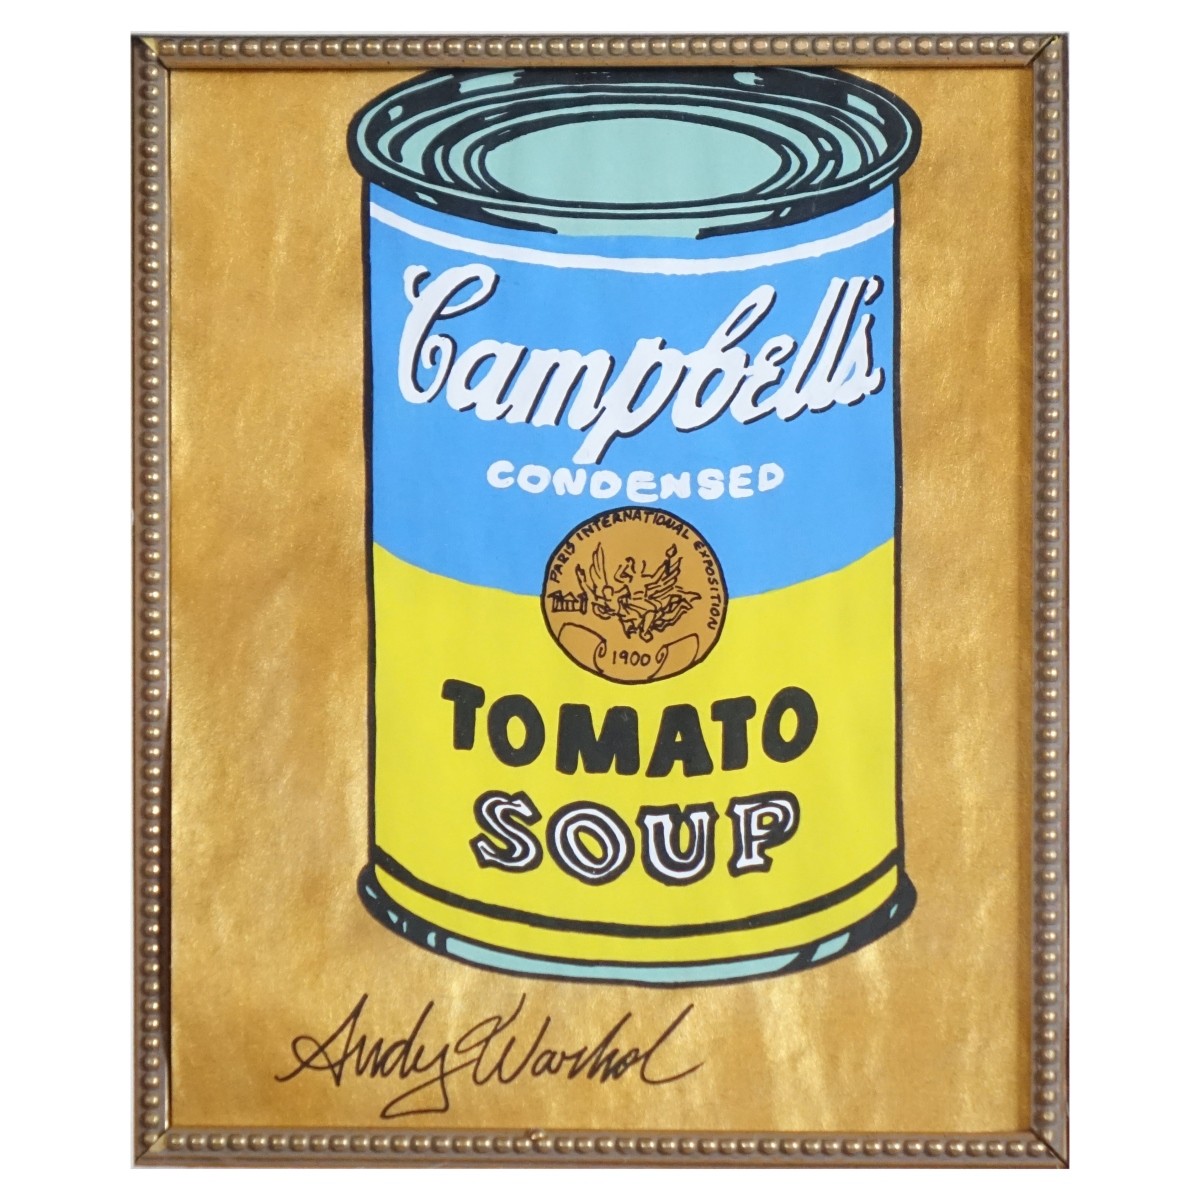 After: Andy Warhol (1928 - 1987)